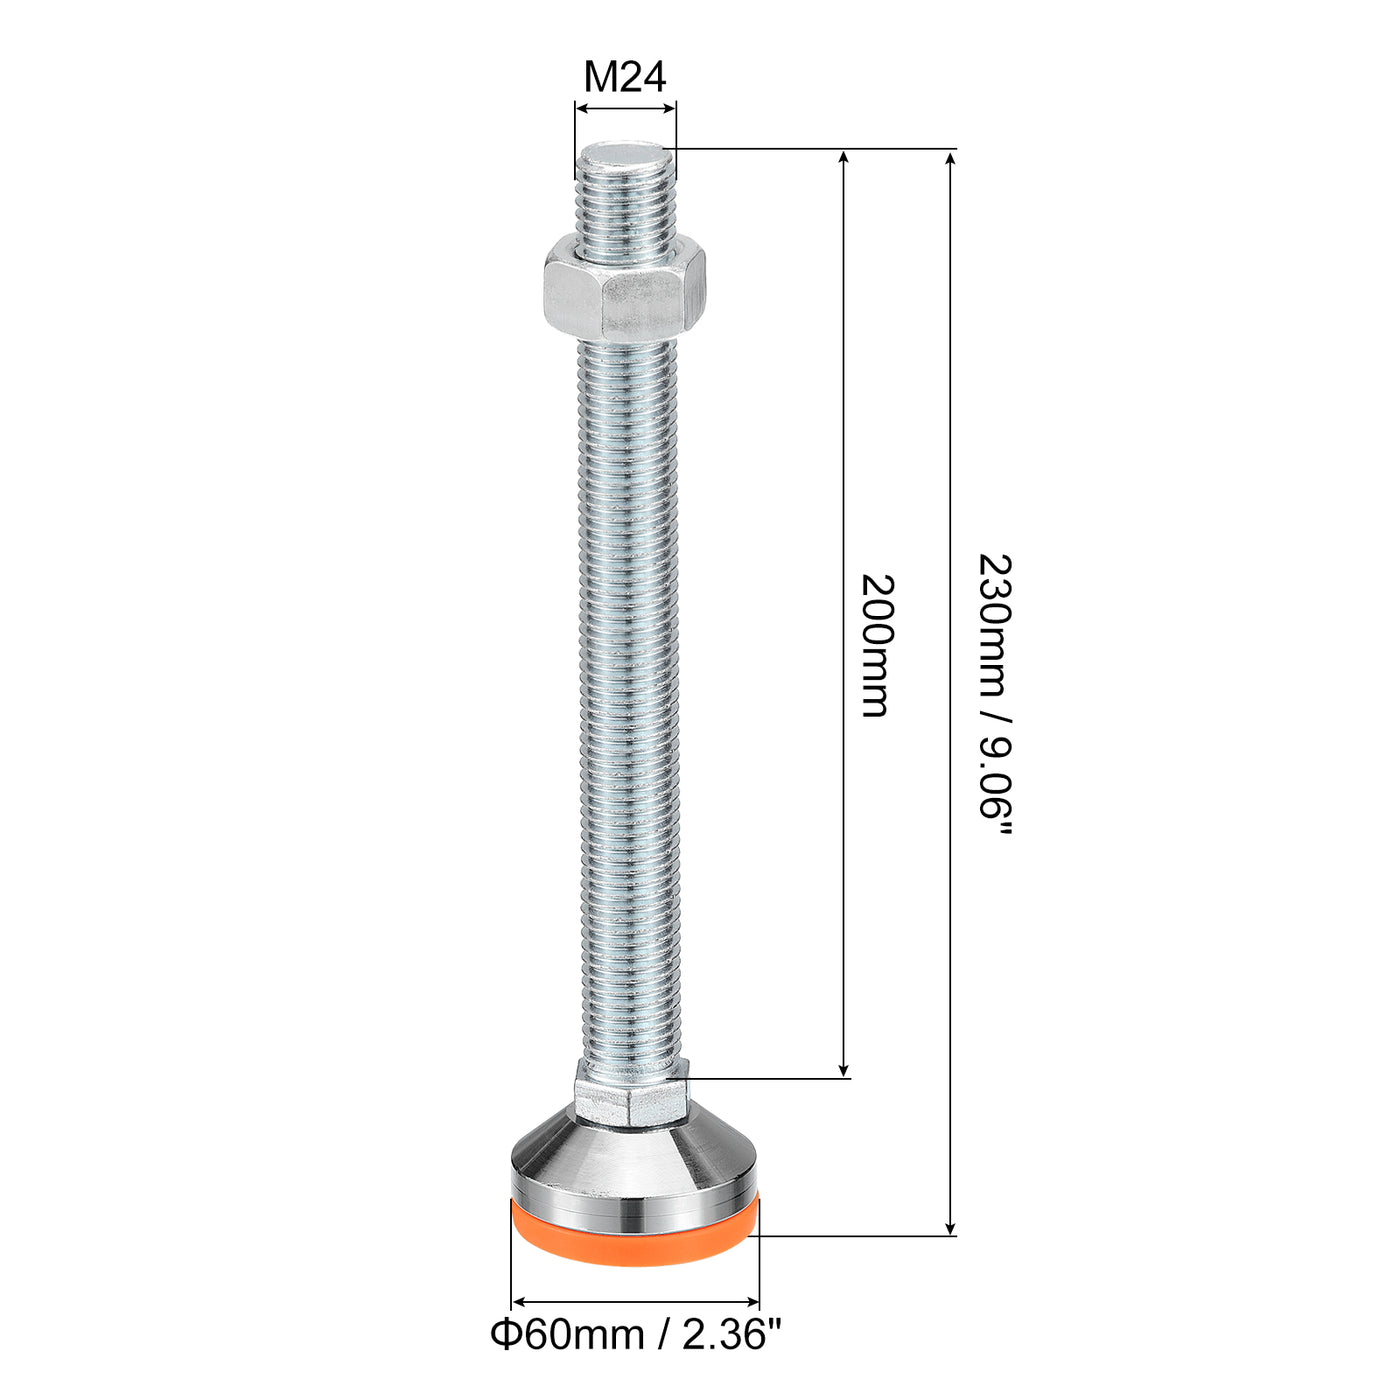 uxcell Uxcell Leveling Feet, 2Pcs M24x200x60mm - Carbon Steel Non-Skid Anti-shock Adjustable Table Feet, Leveling Screw Leg for Furniture Workshops Equipment